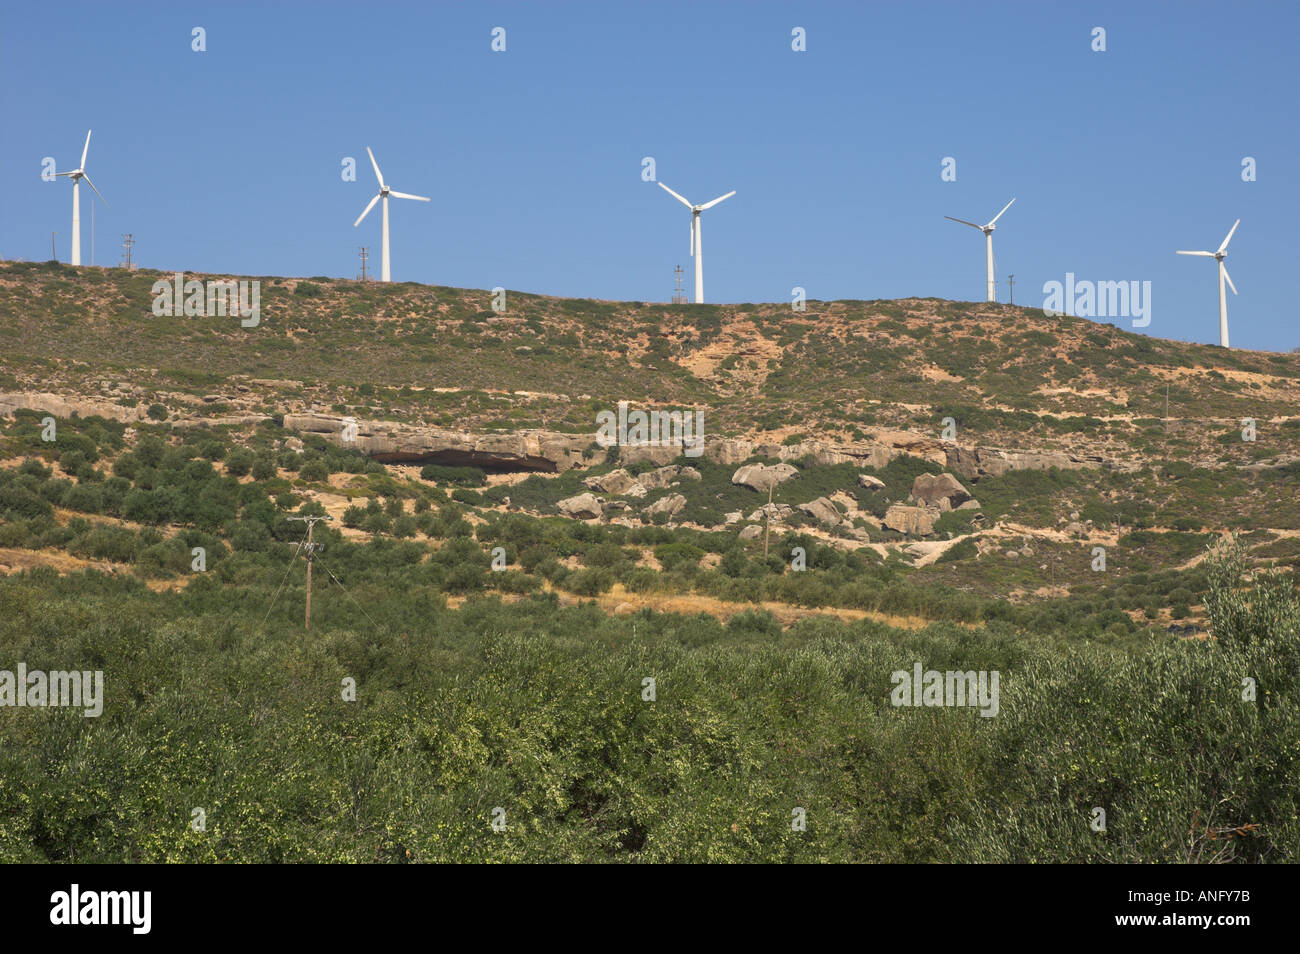 Greece Crete East Coast Palekastro area wind farm modern windmill producing electricity view with olive trees in frgd  Stock Photo